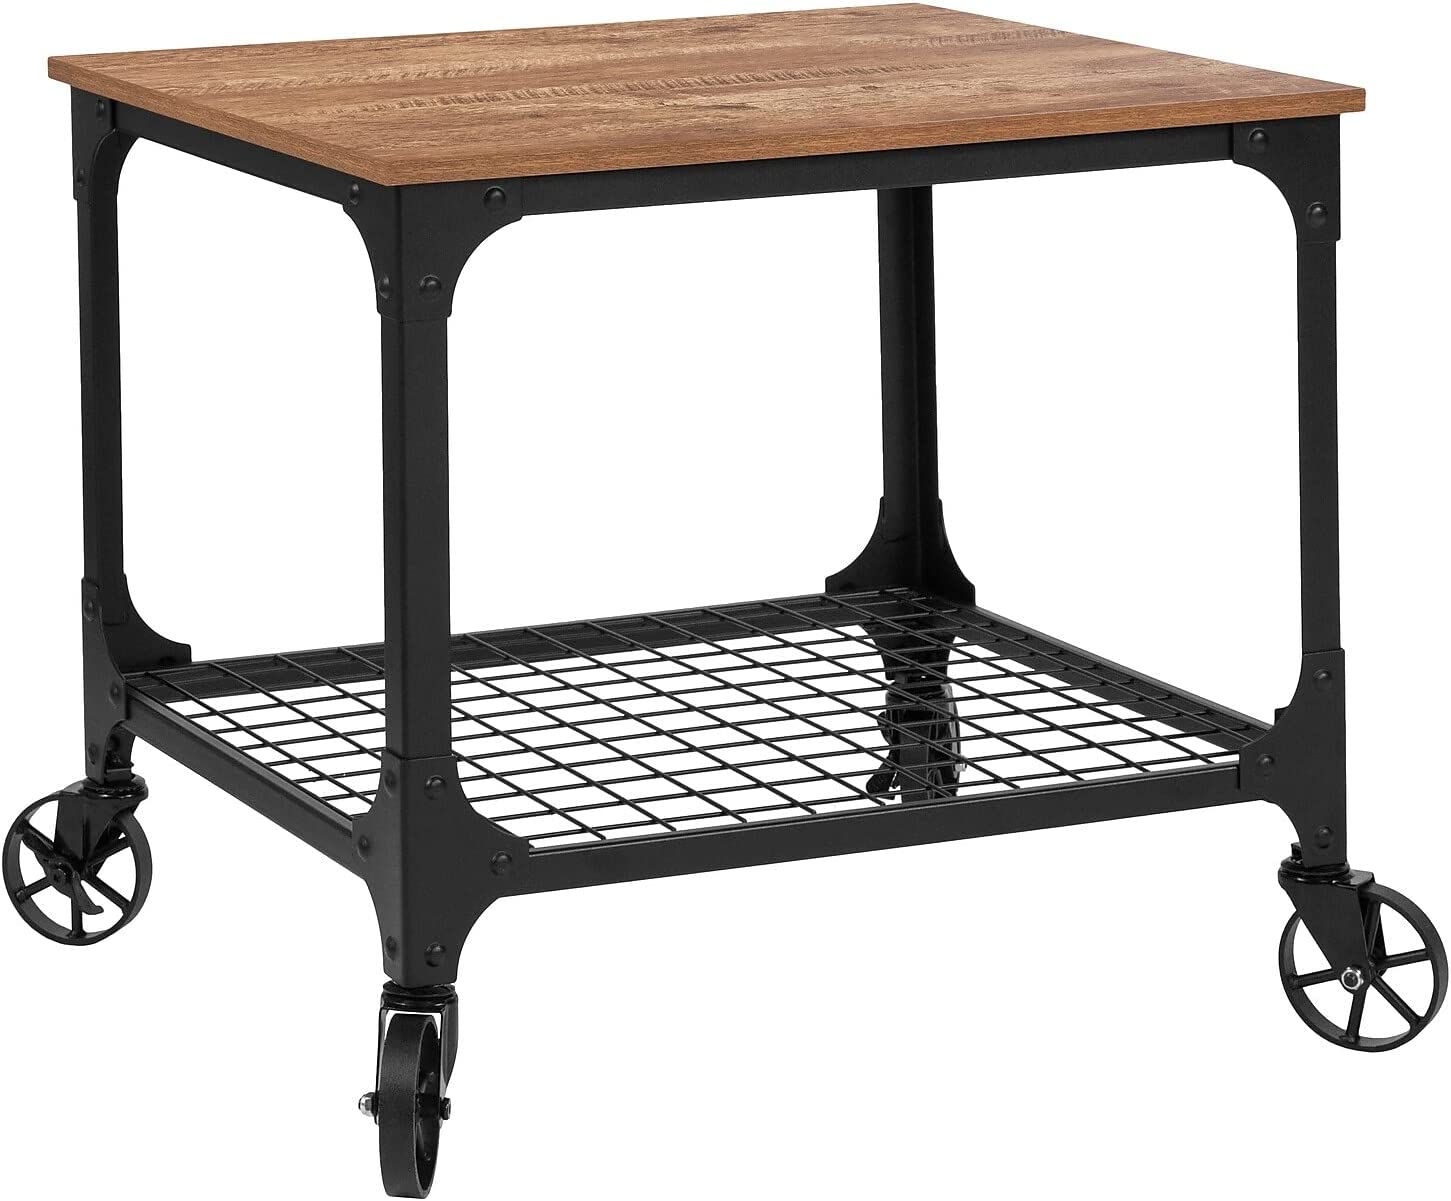 Flash Furniture Rustic Grant Park Wood Grain And Industrial Iron Kitchen Serving And Bar Cart, One Size